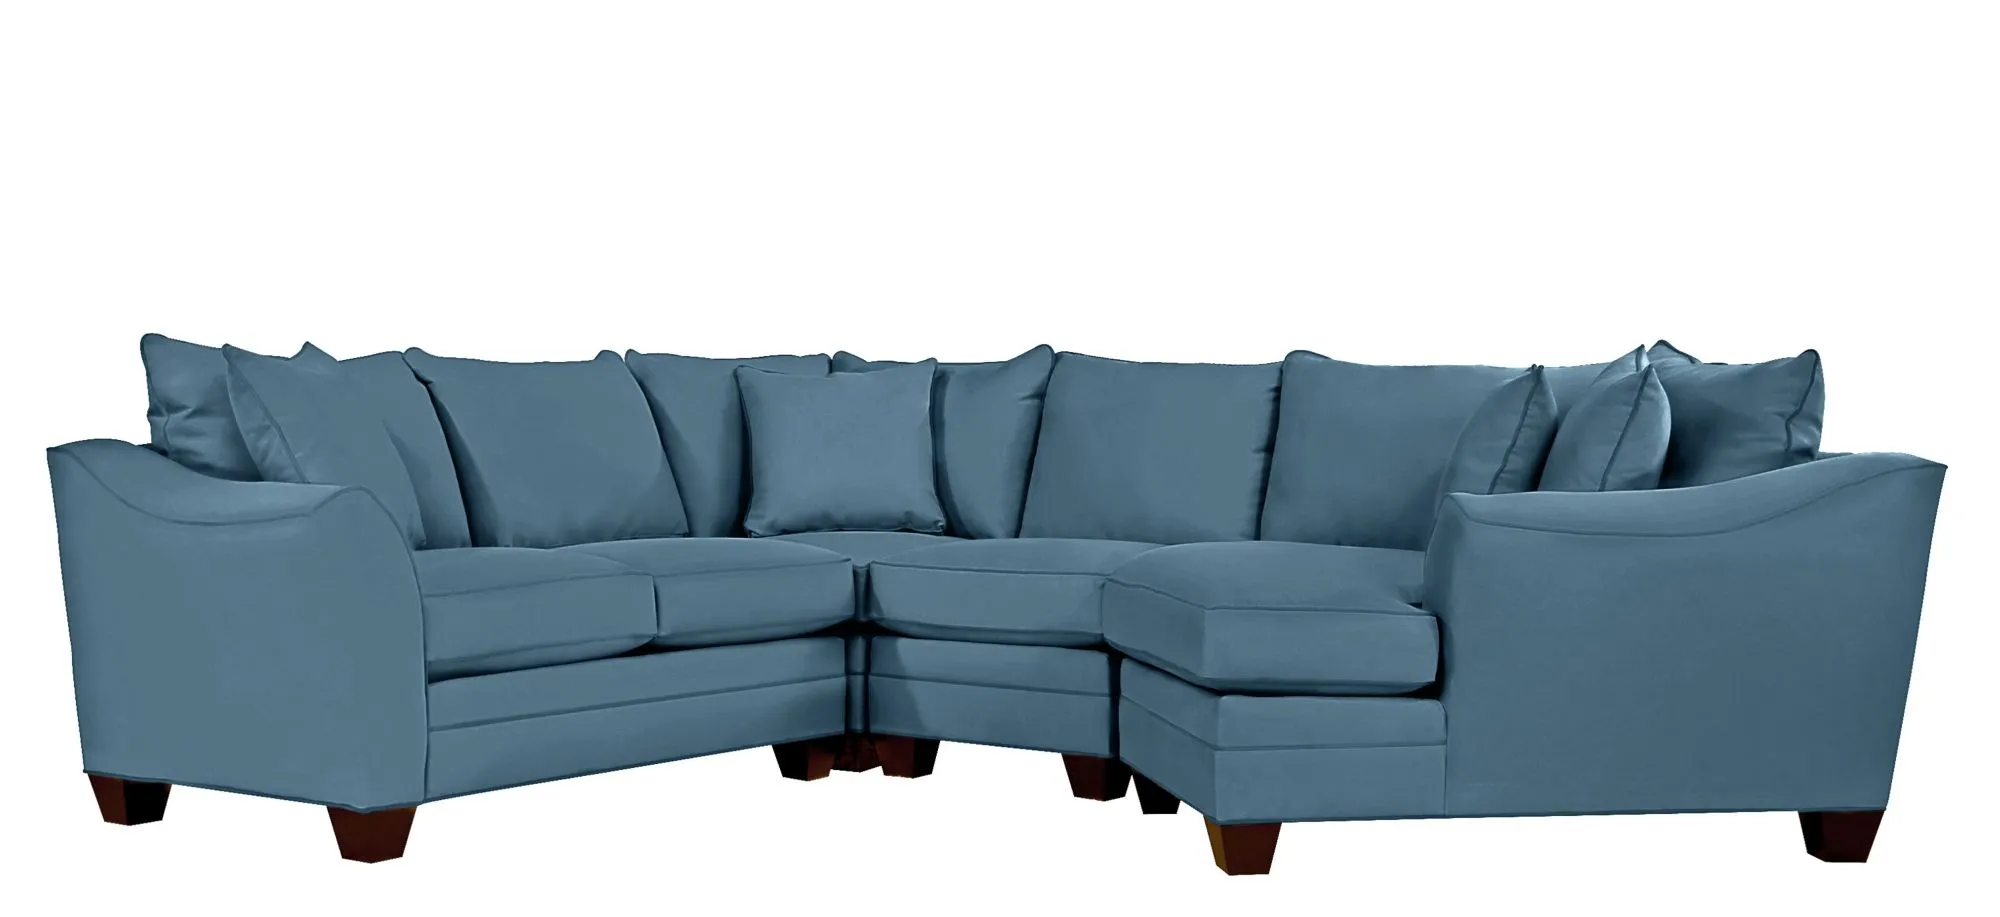 Foresthill 4-pc. Right Hand Cuddler Sectional Sofa in Suede So Soft Indigo by H.M. Richards